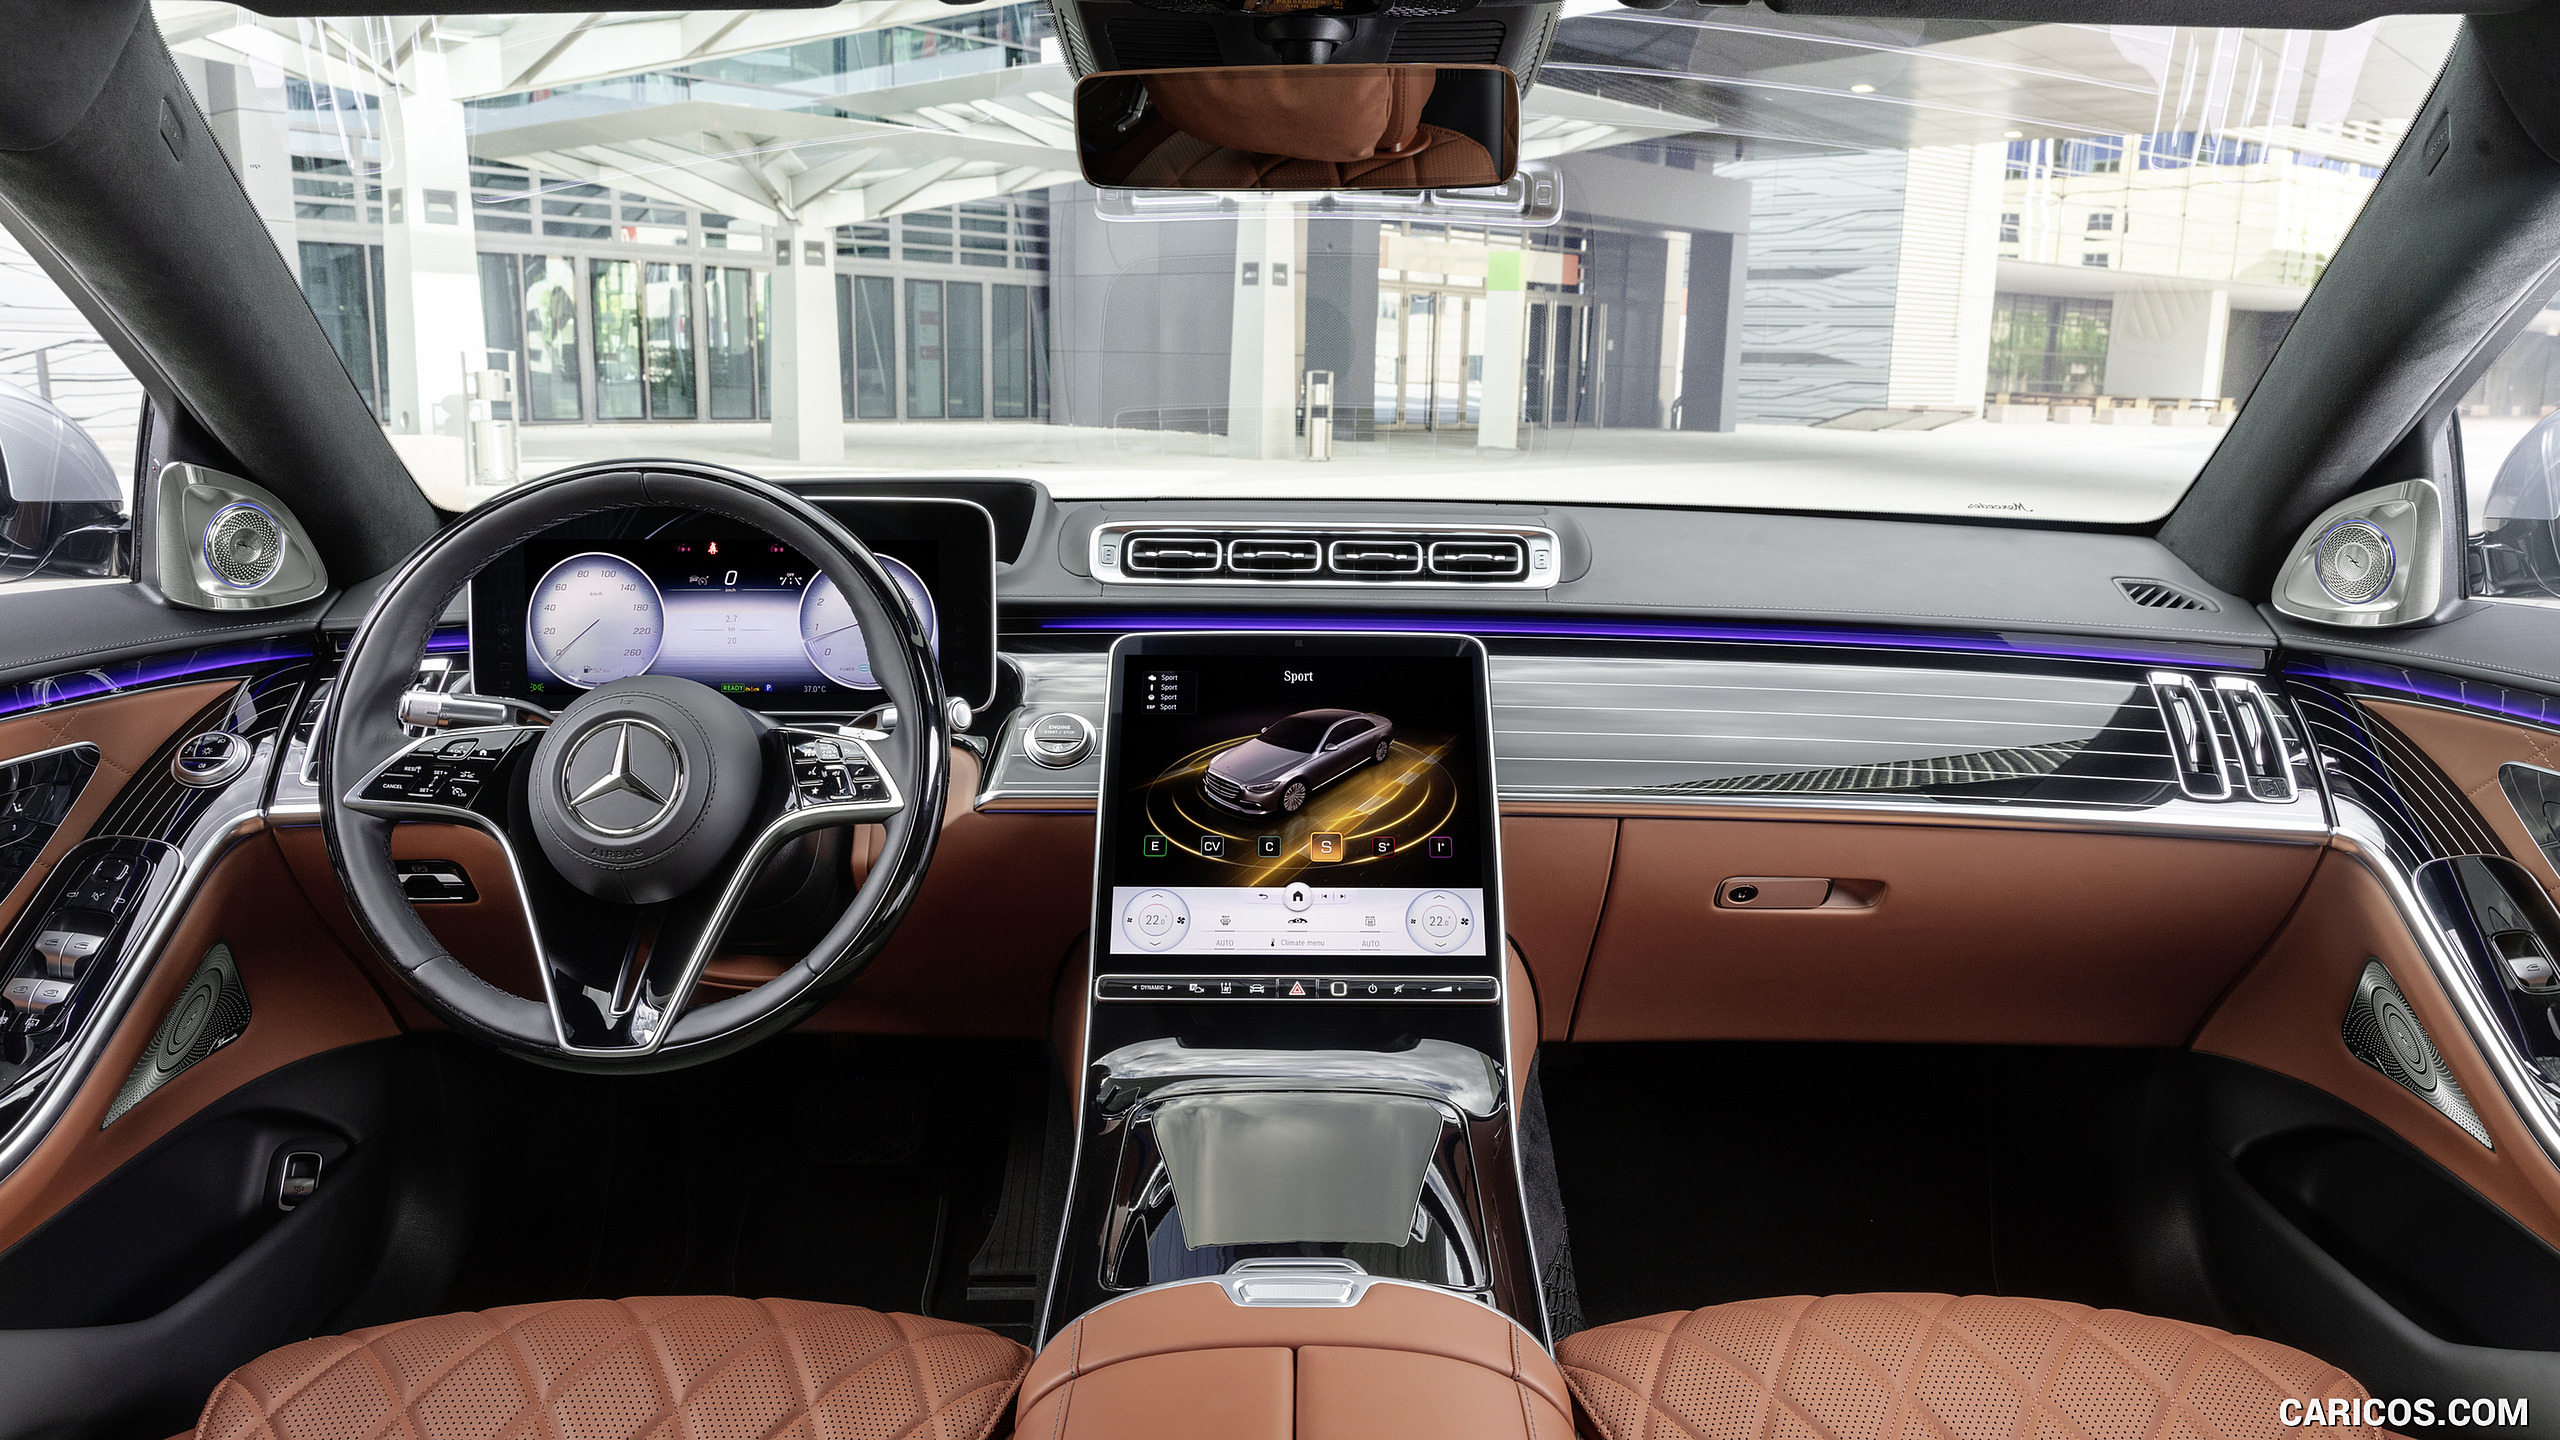 2021 Mercedes-Benz S-Class (Color: Leather Siena Brown) - Interior, Cockpit, #104 of 316